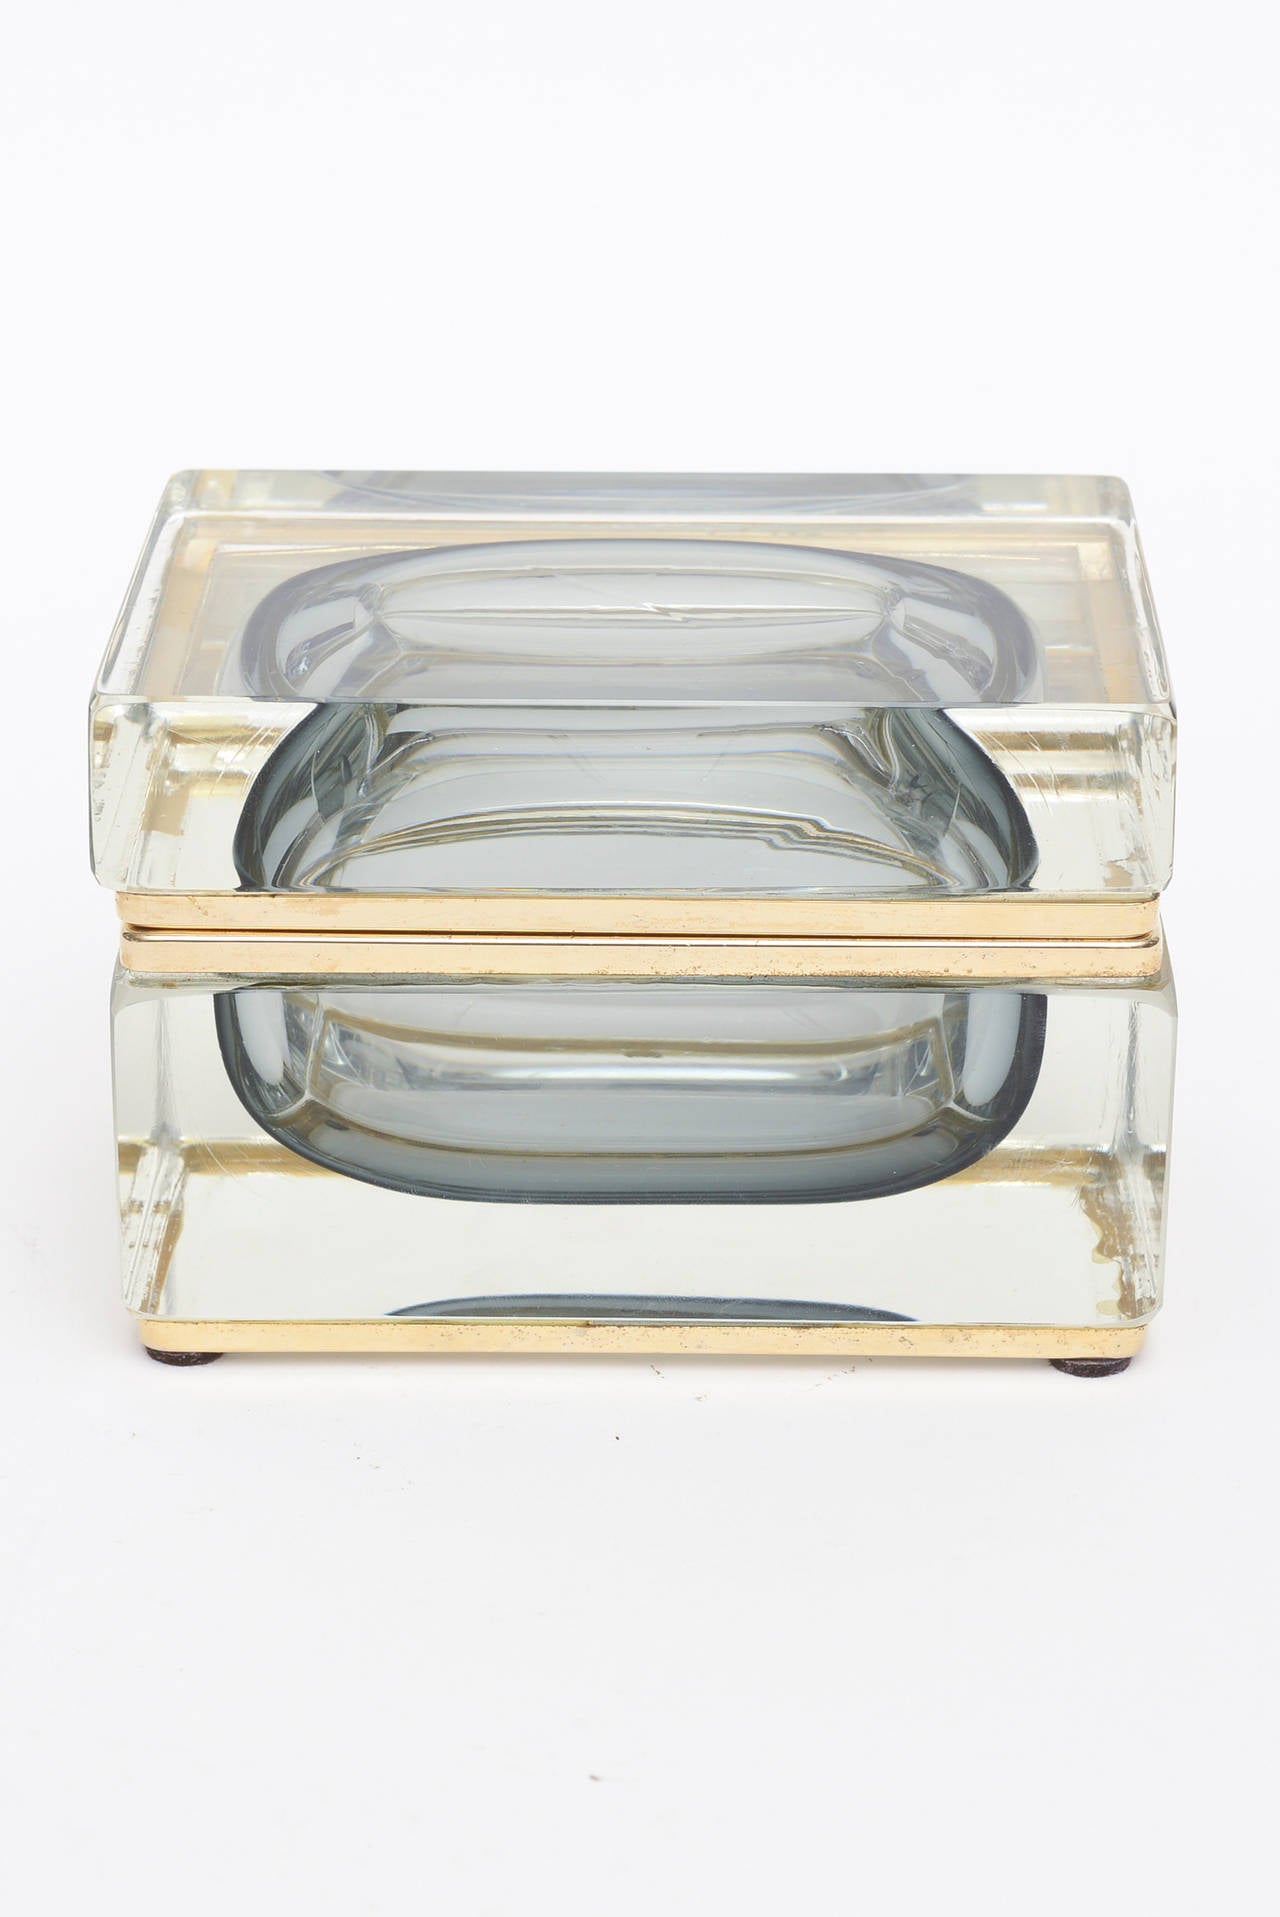 The beautiful colors of the Sommerso from gray blue to smokey gray make this hinged Italian Murano box with all kinds of hallmarks a lovely vessel for jewelry or just as is a glass box.

It is 24-carat gold plated as exemplified on the sides. and